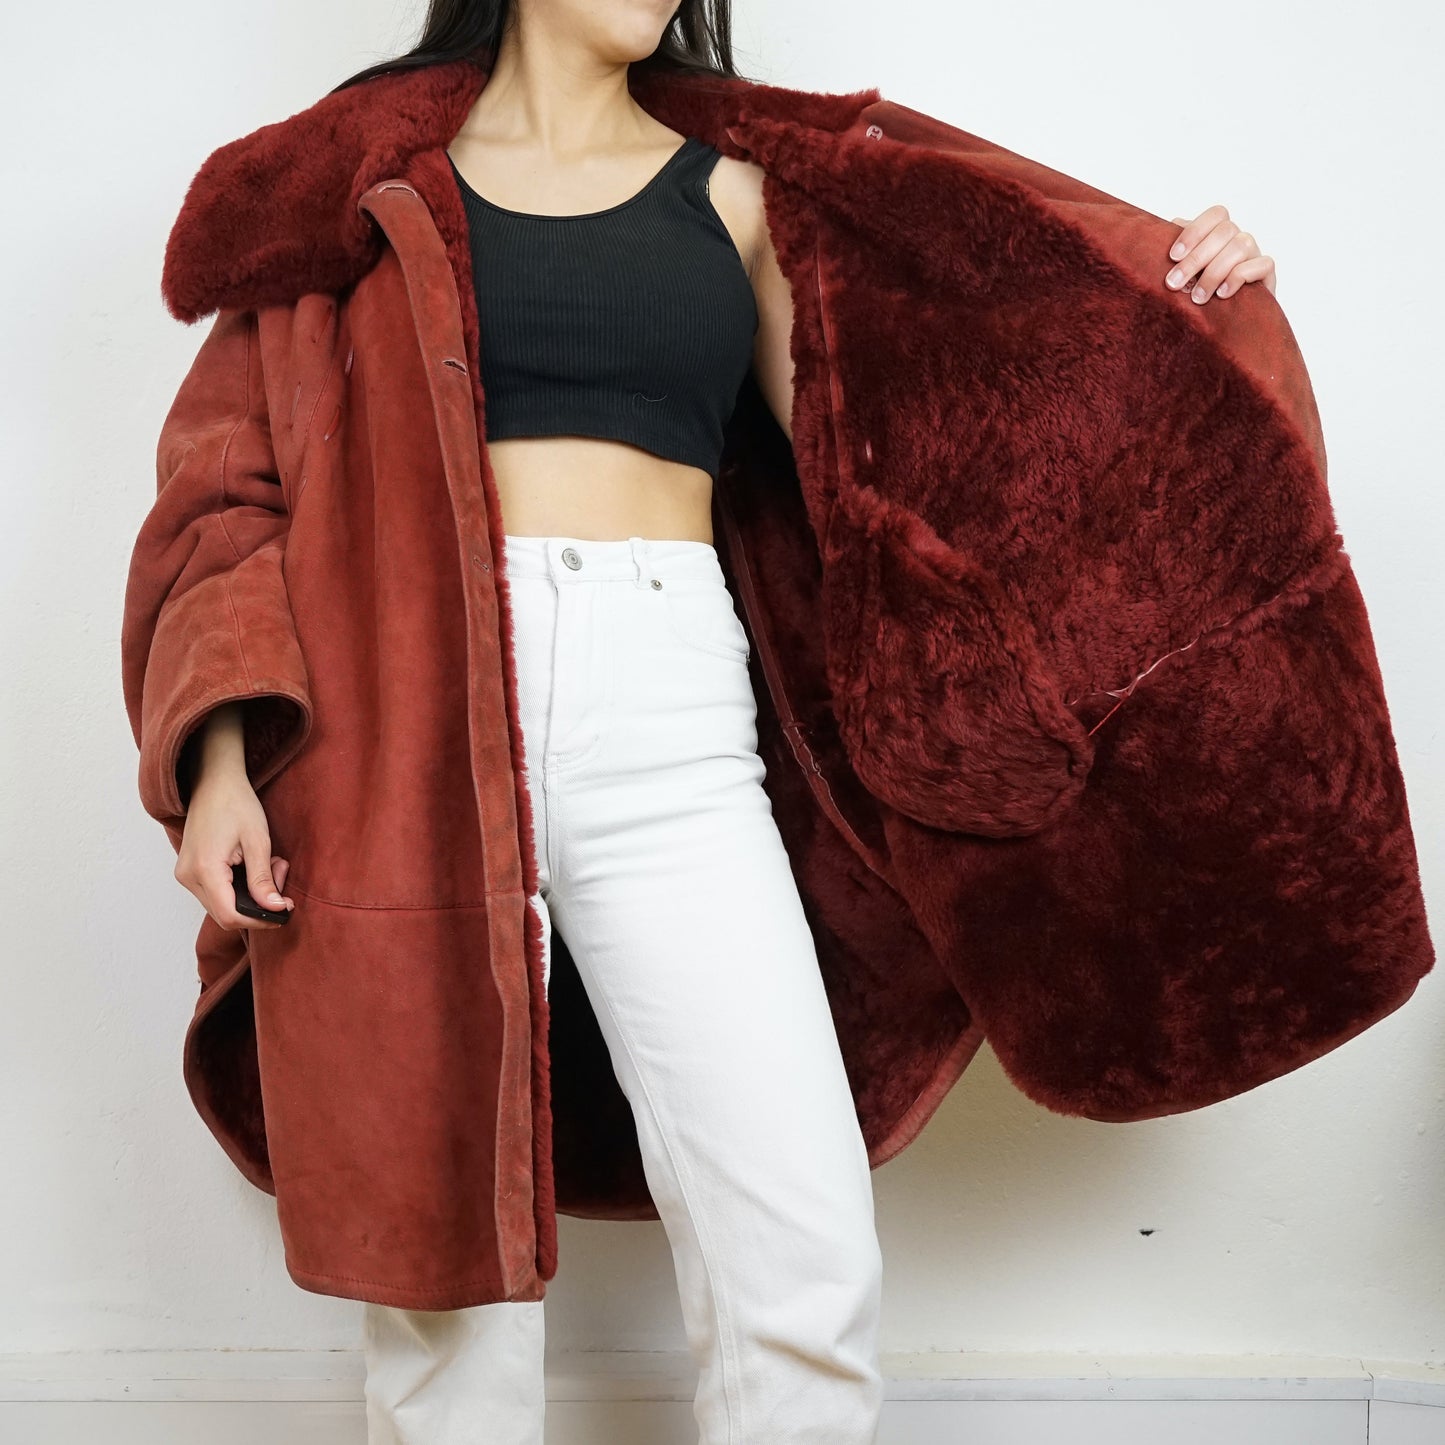 Vintage red Shearling Jacket Cape Size L-XL